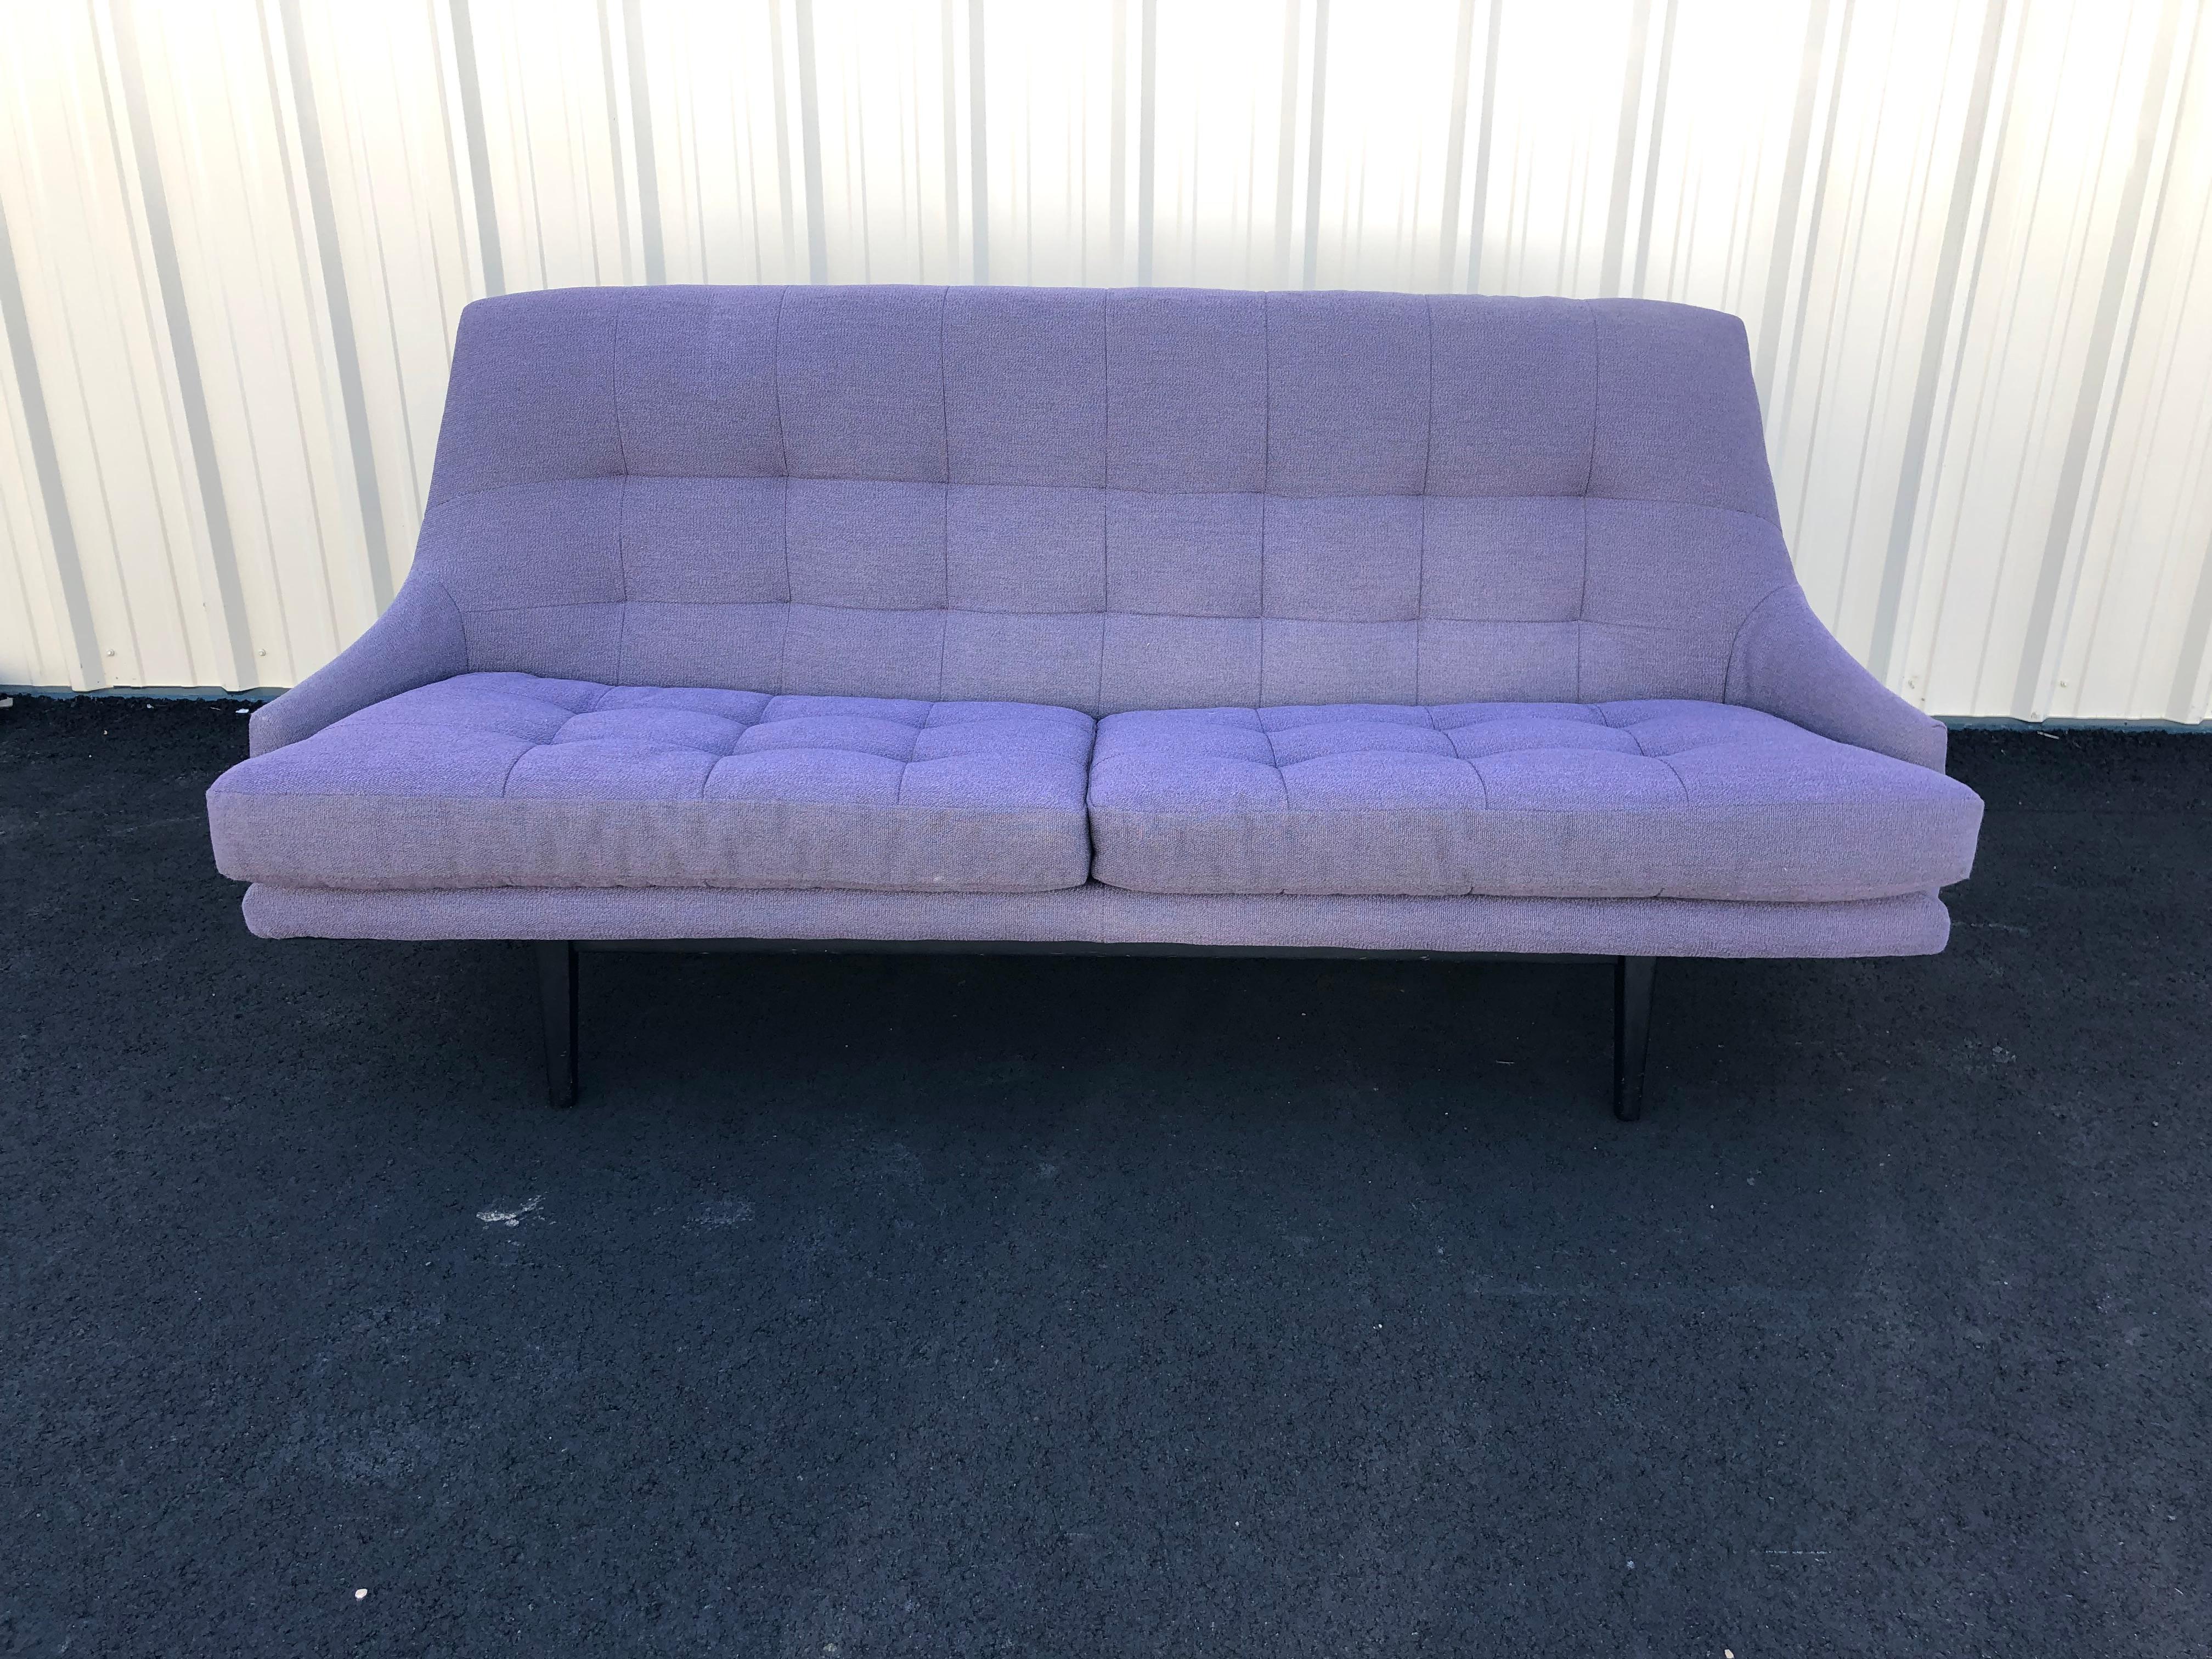 A rare find in this super stylish and very comfortable mid century modern Swedish sofa.  The silhouette is sleek with high back, low arms, double tufted seat cushions and tufted seat back.  Finished on the back so looks great floating in a room. 